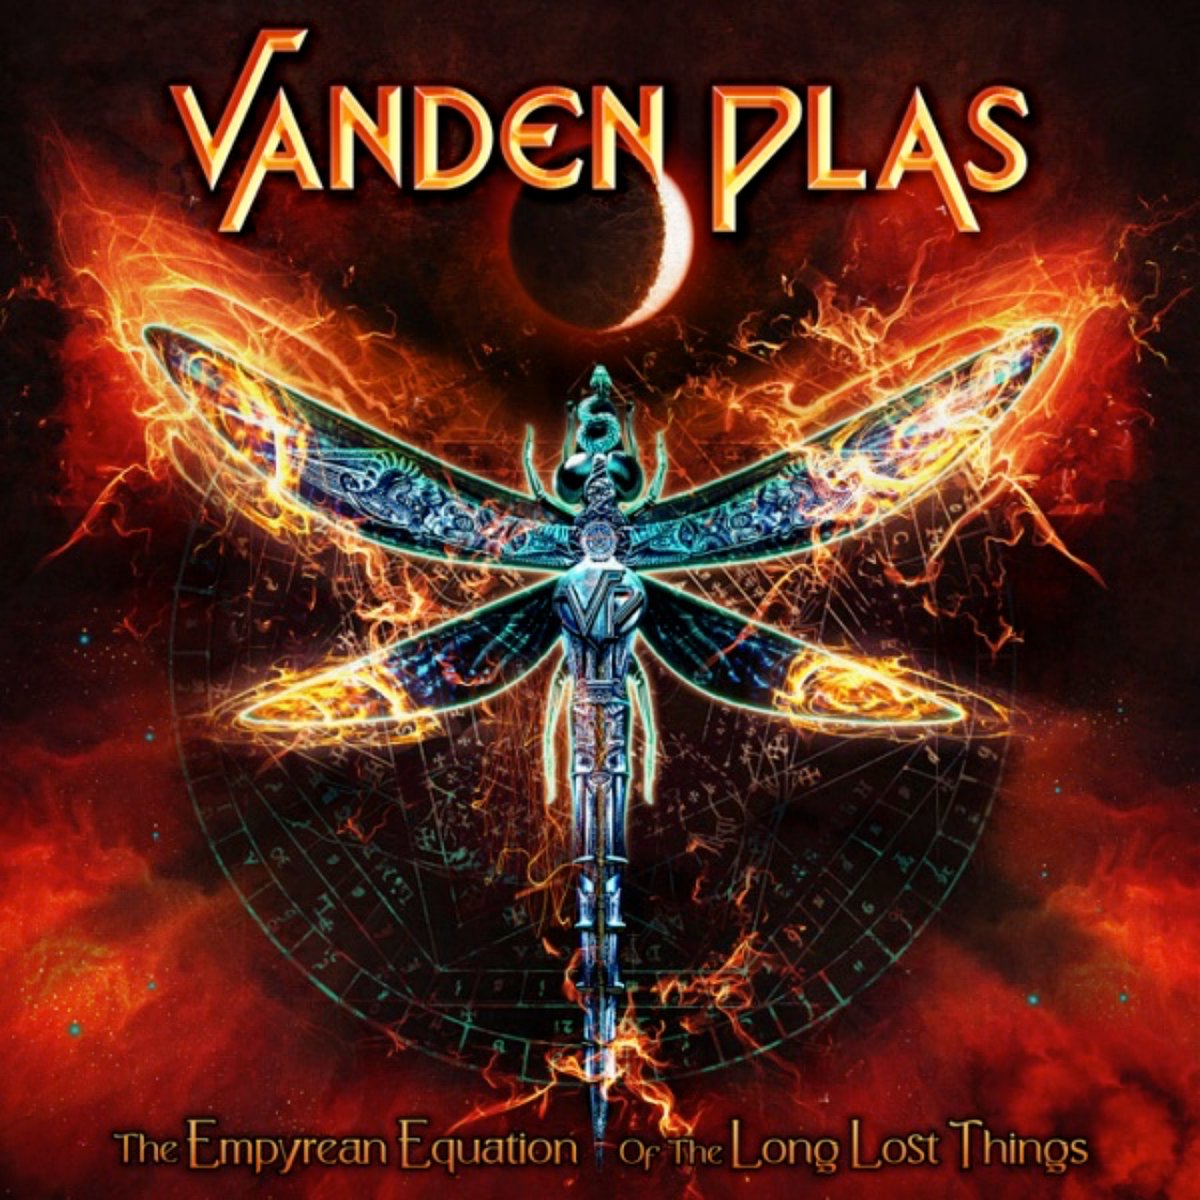 VANDEN PLAS/ THE EMPYREAN EQUATION OF THE LONG LOST THINGS - 19/4/24 Vanden Plas are excited to reveal the upcoming release of their latest album, “The Empyrean Equation of the Long Lost Things” @MMH @VandenPlasofficial @FrontiersMusic1 mmhradio.co.uk/vanden-plas-re…